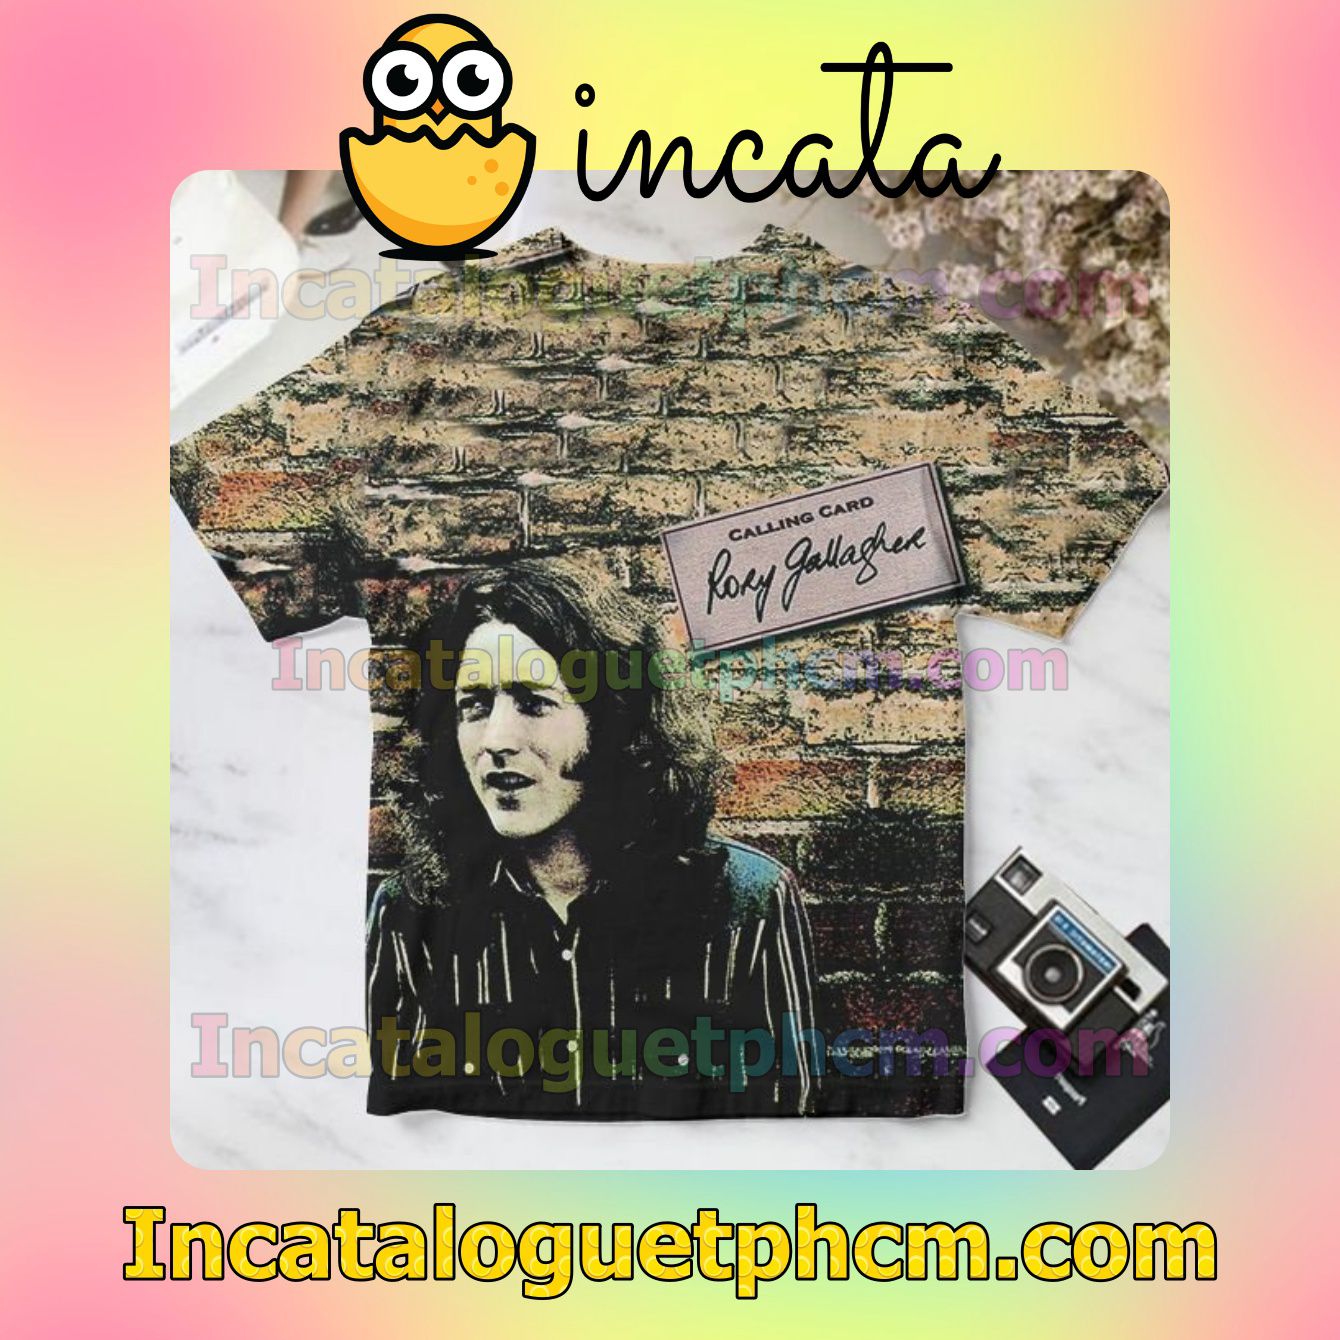 Rory Gallagher Calling Card Album Cover Personalized Shirt